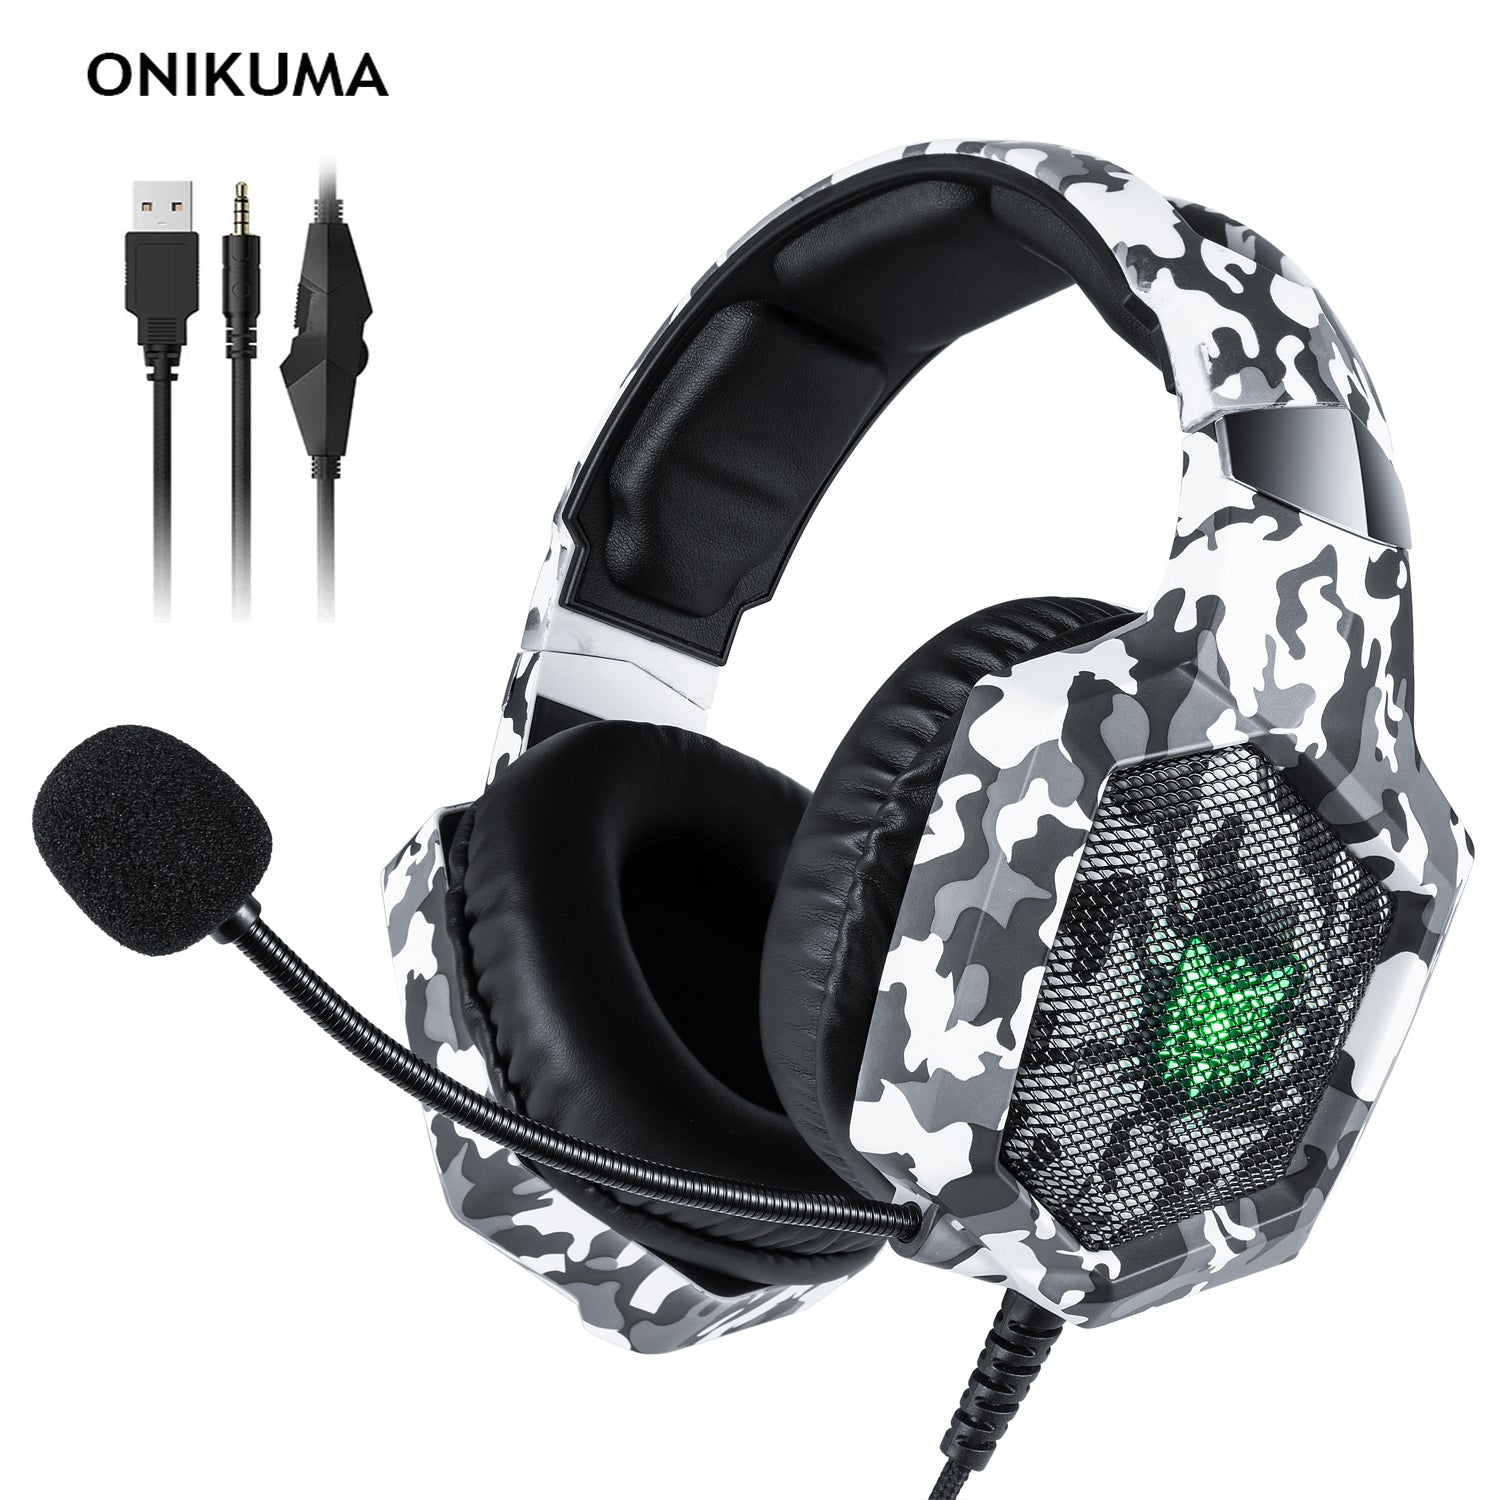 Gaming Headset, ONIKUMA K8 Gaming Headset Wired Stereo Headphones Noise-canceling with Mic LED Lights Earphone for PS4 XBox One PC Laptop Tablet, Grey Camo